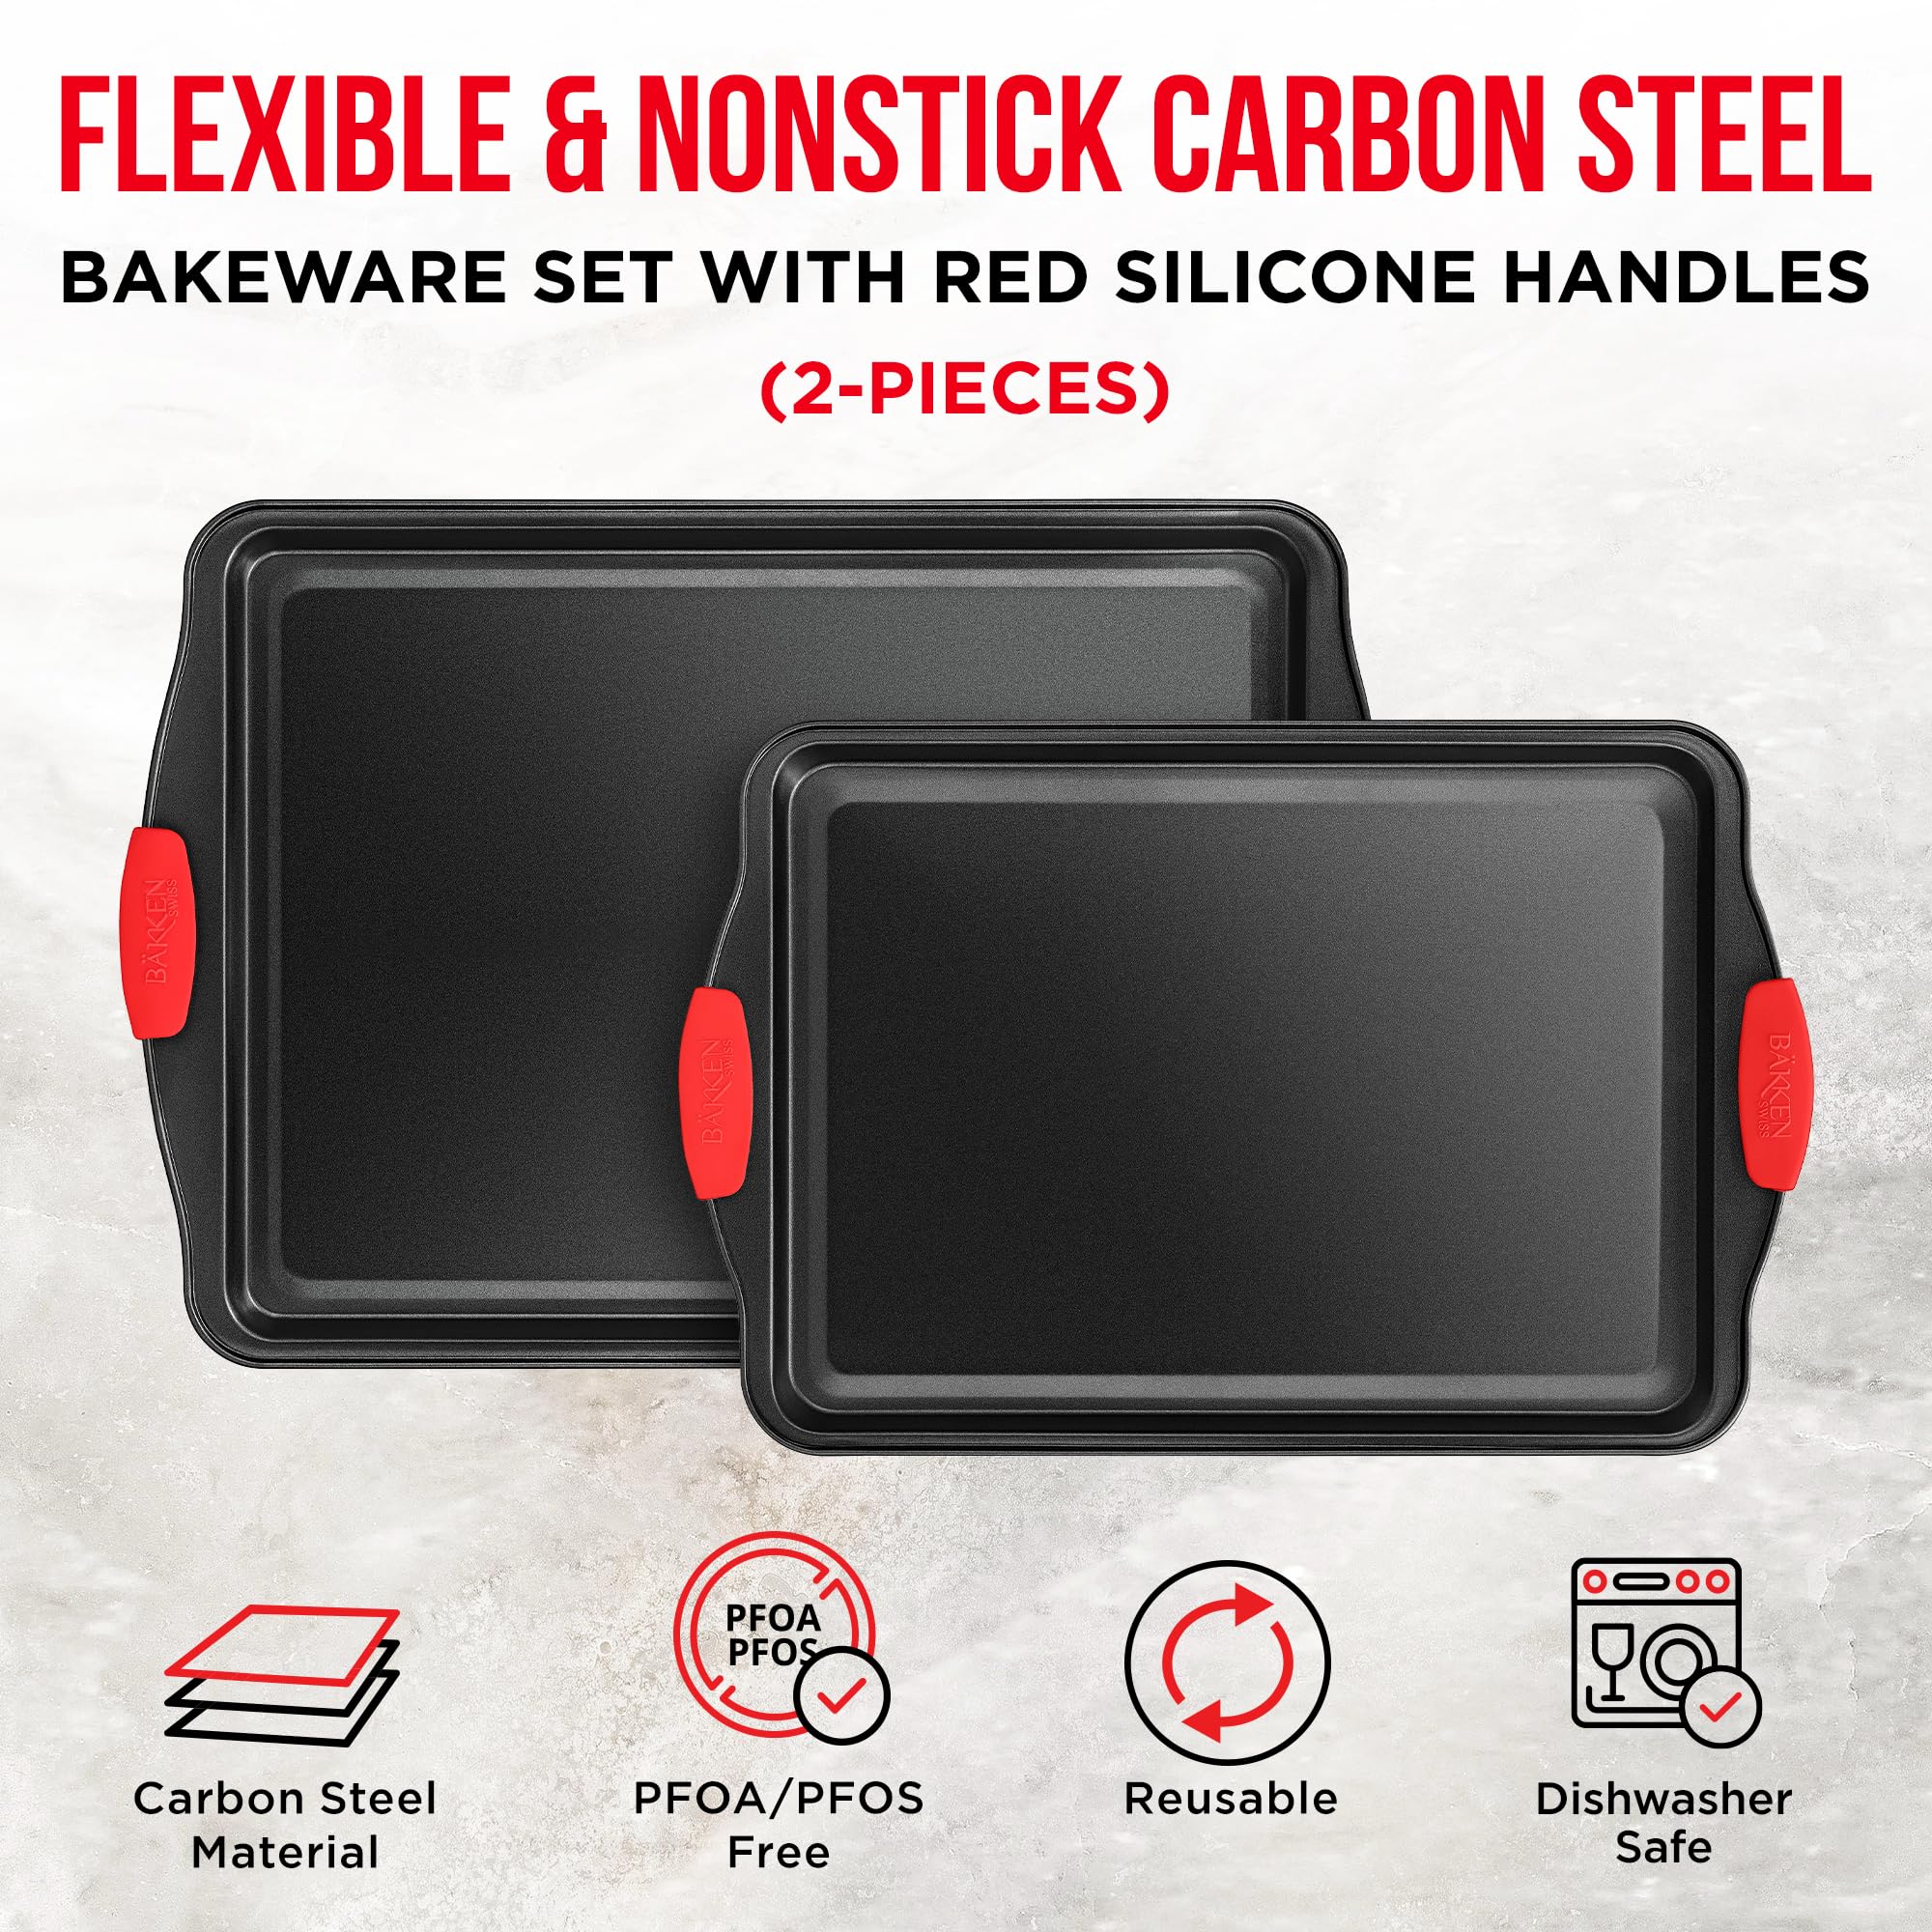 2 Piece Set Nonstick Carbon Steel Oven Bakeware -Professional Quality Kitchen Cooking Baking Trays -PFOA, PFOS, PTFE-Free Small & MediumBaking Sheet Pans with Red Silicone Handles